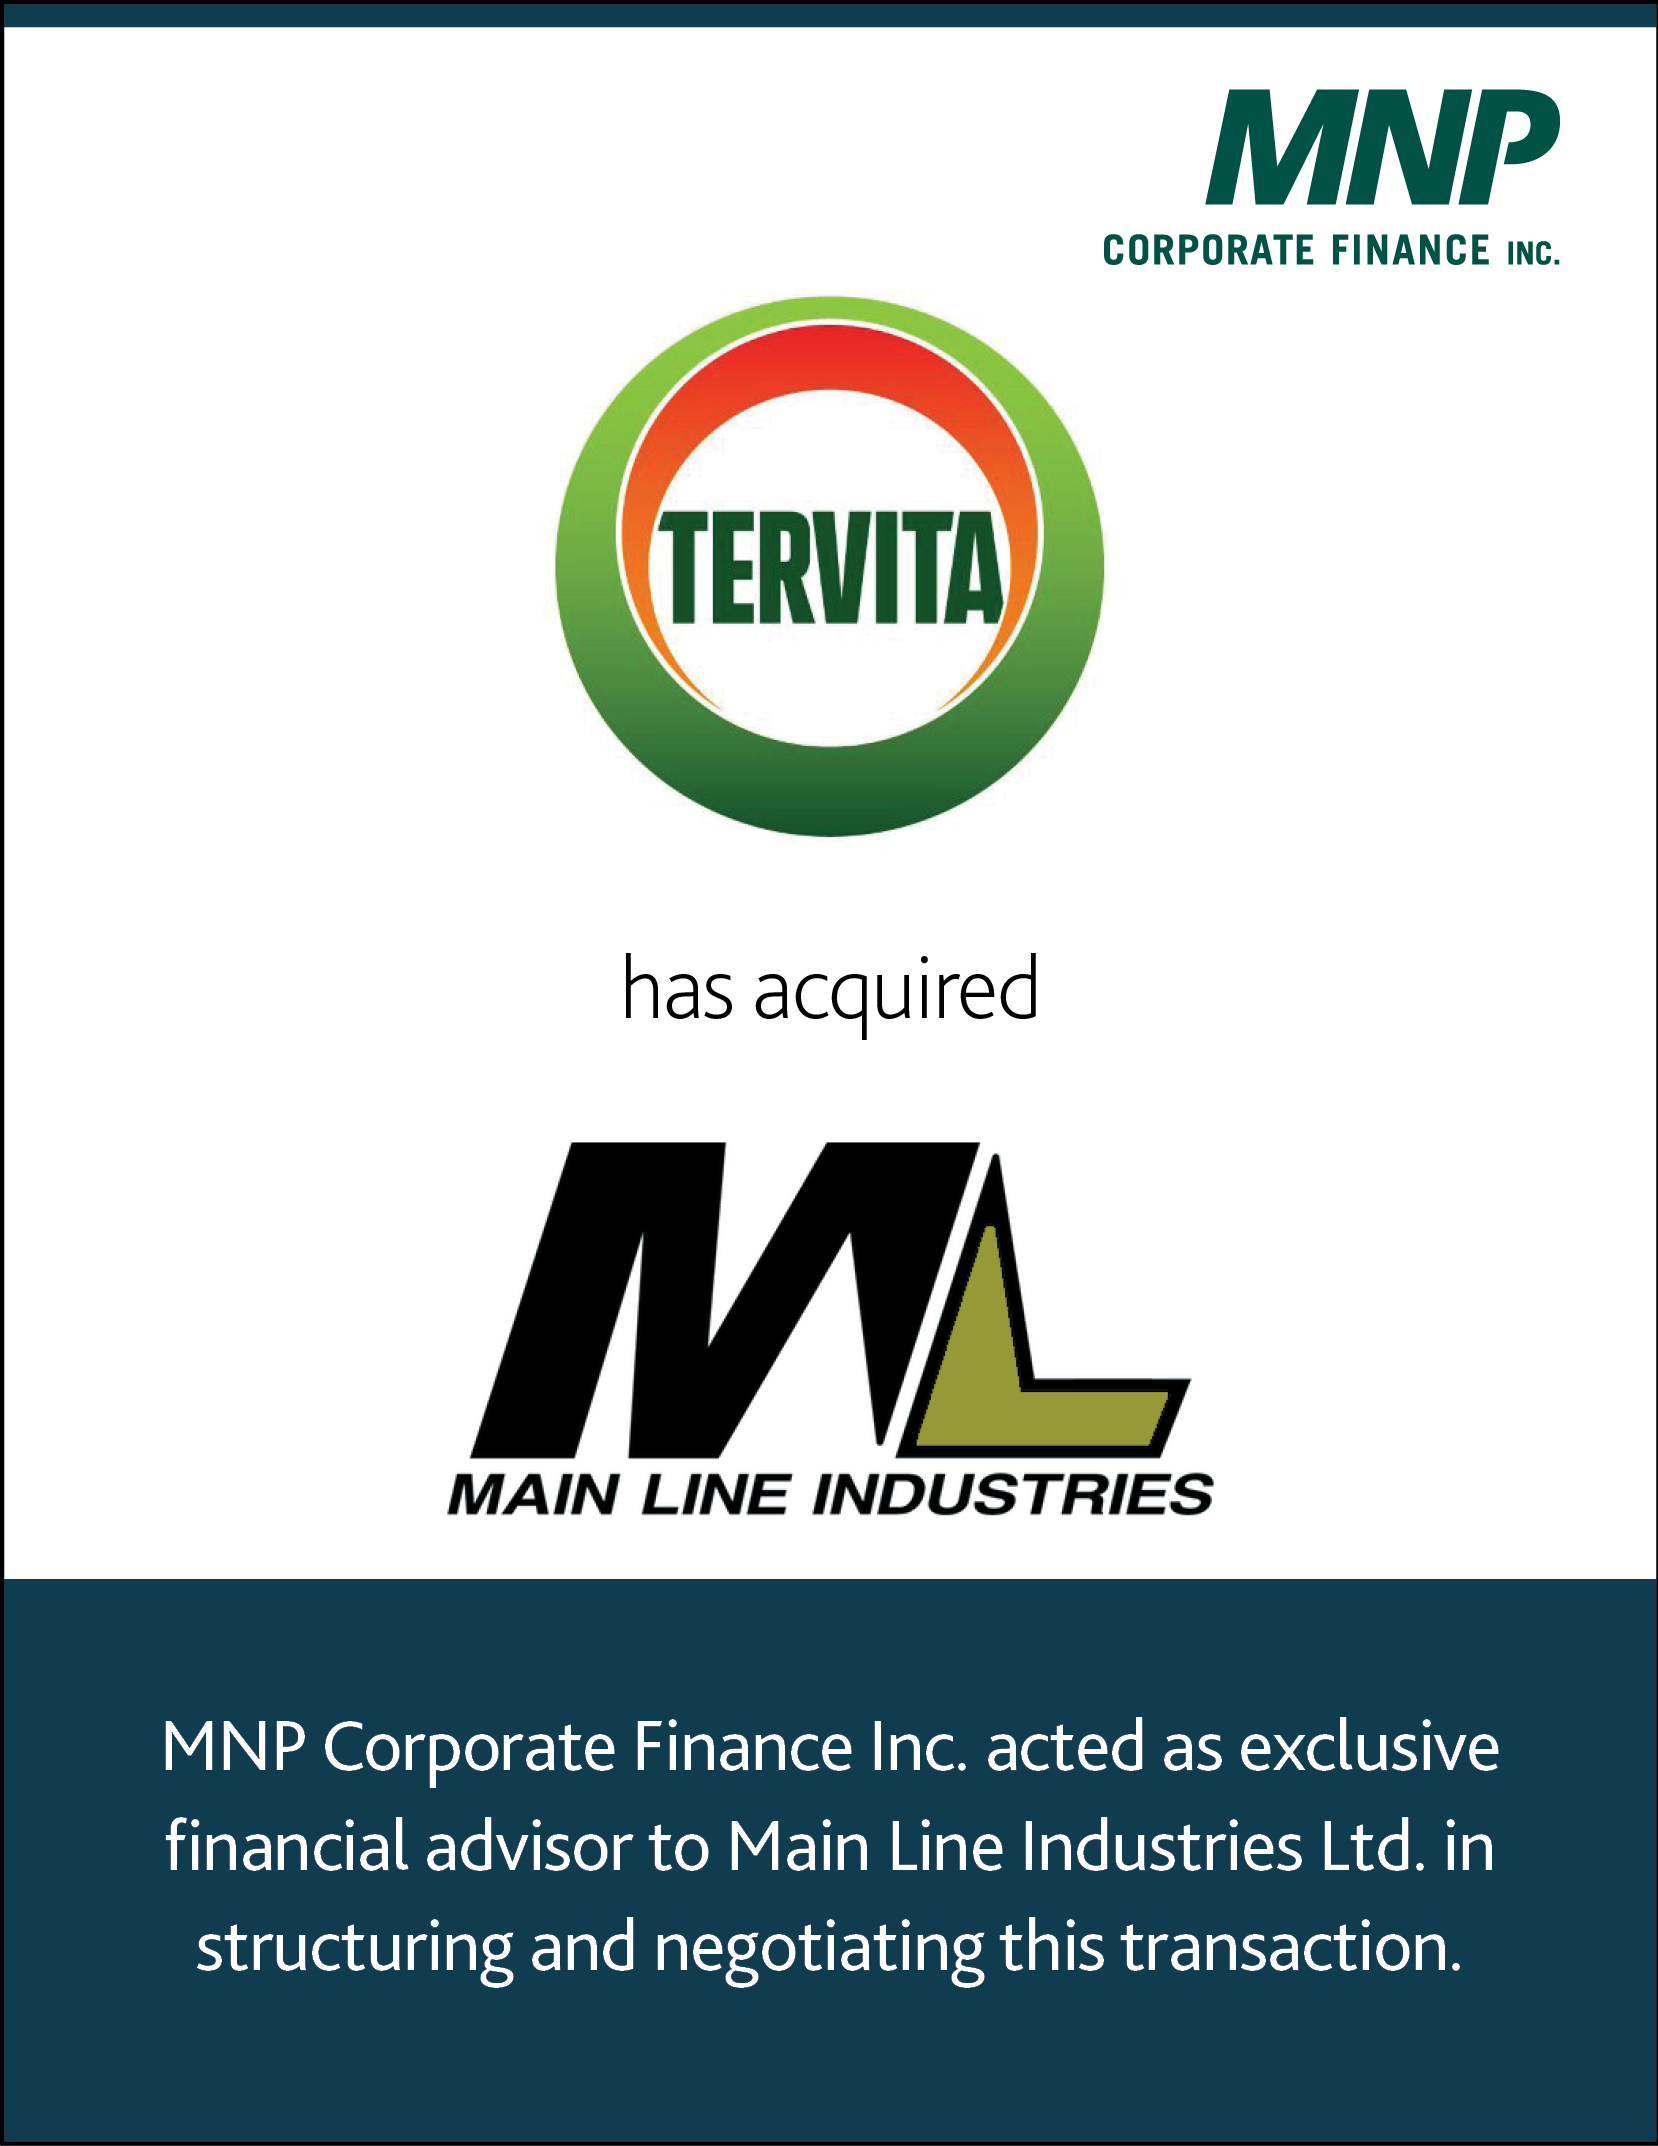 Tervita has acquired Main Line Industries 